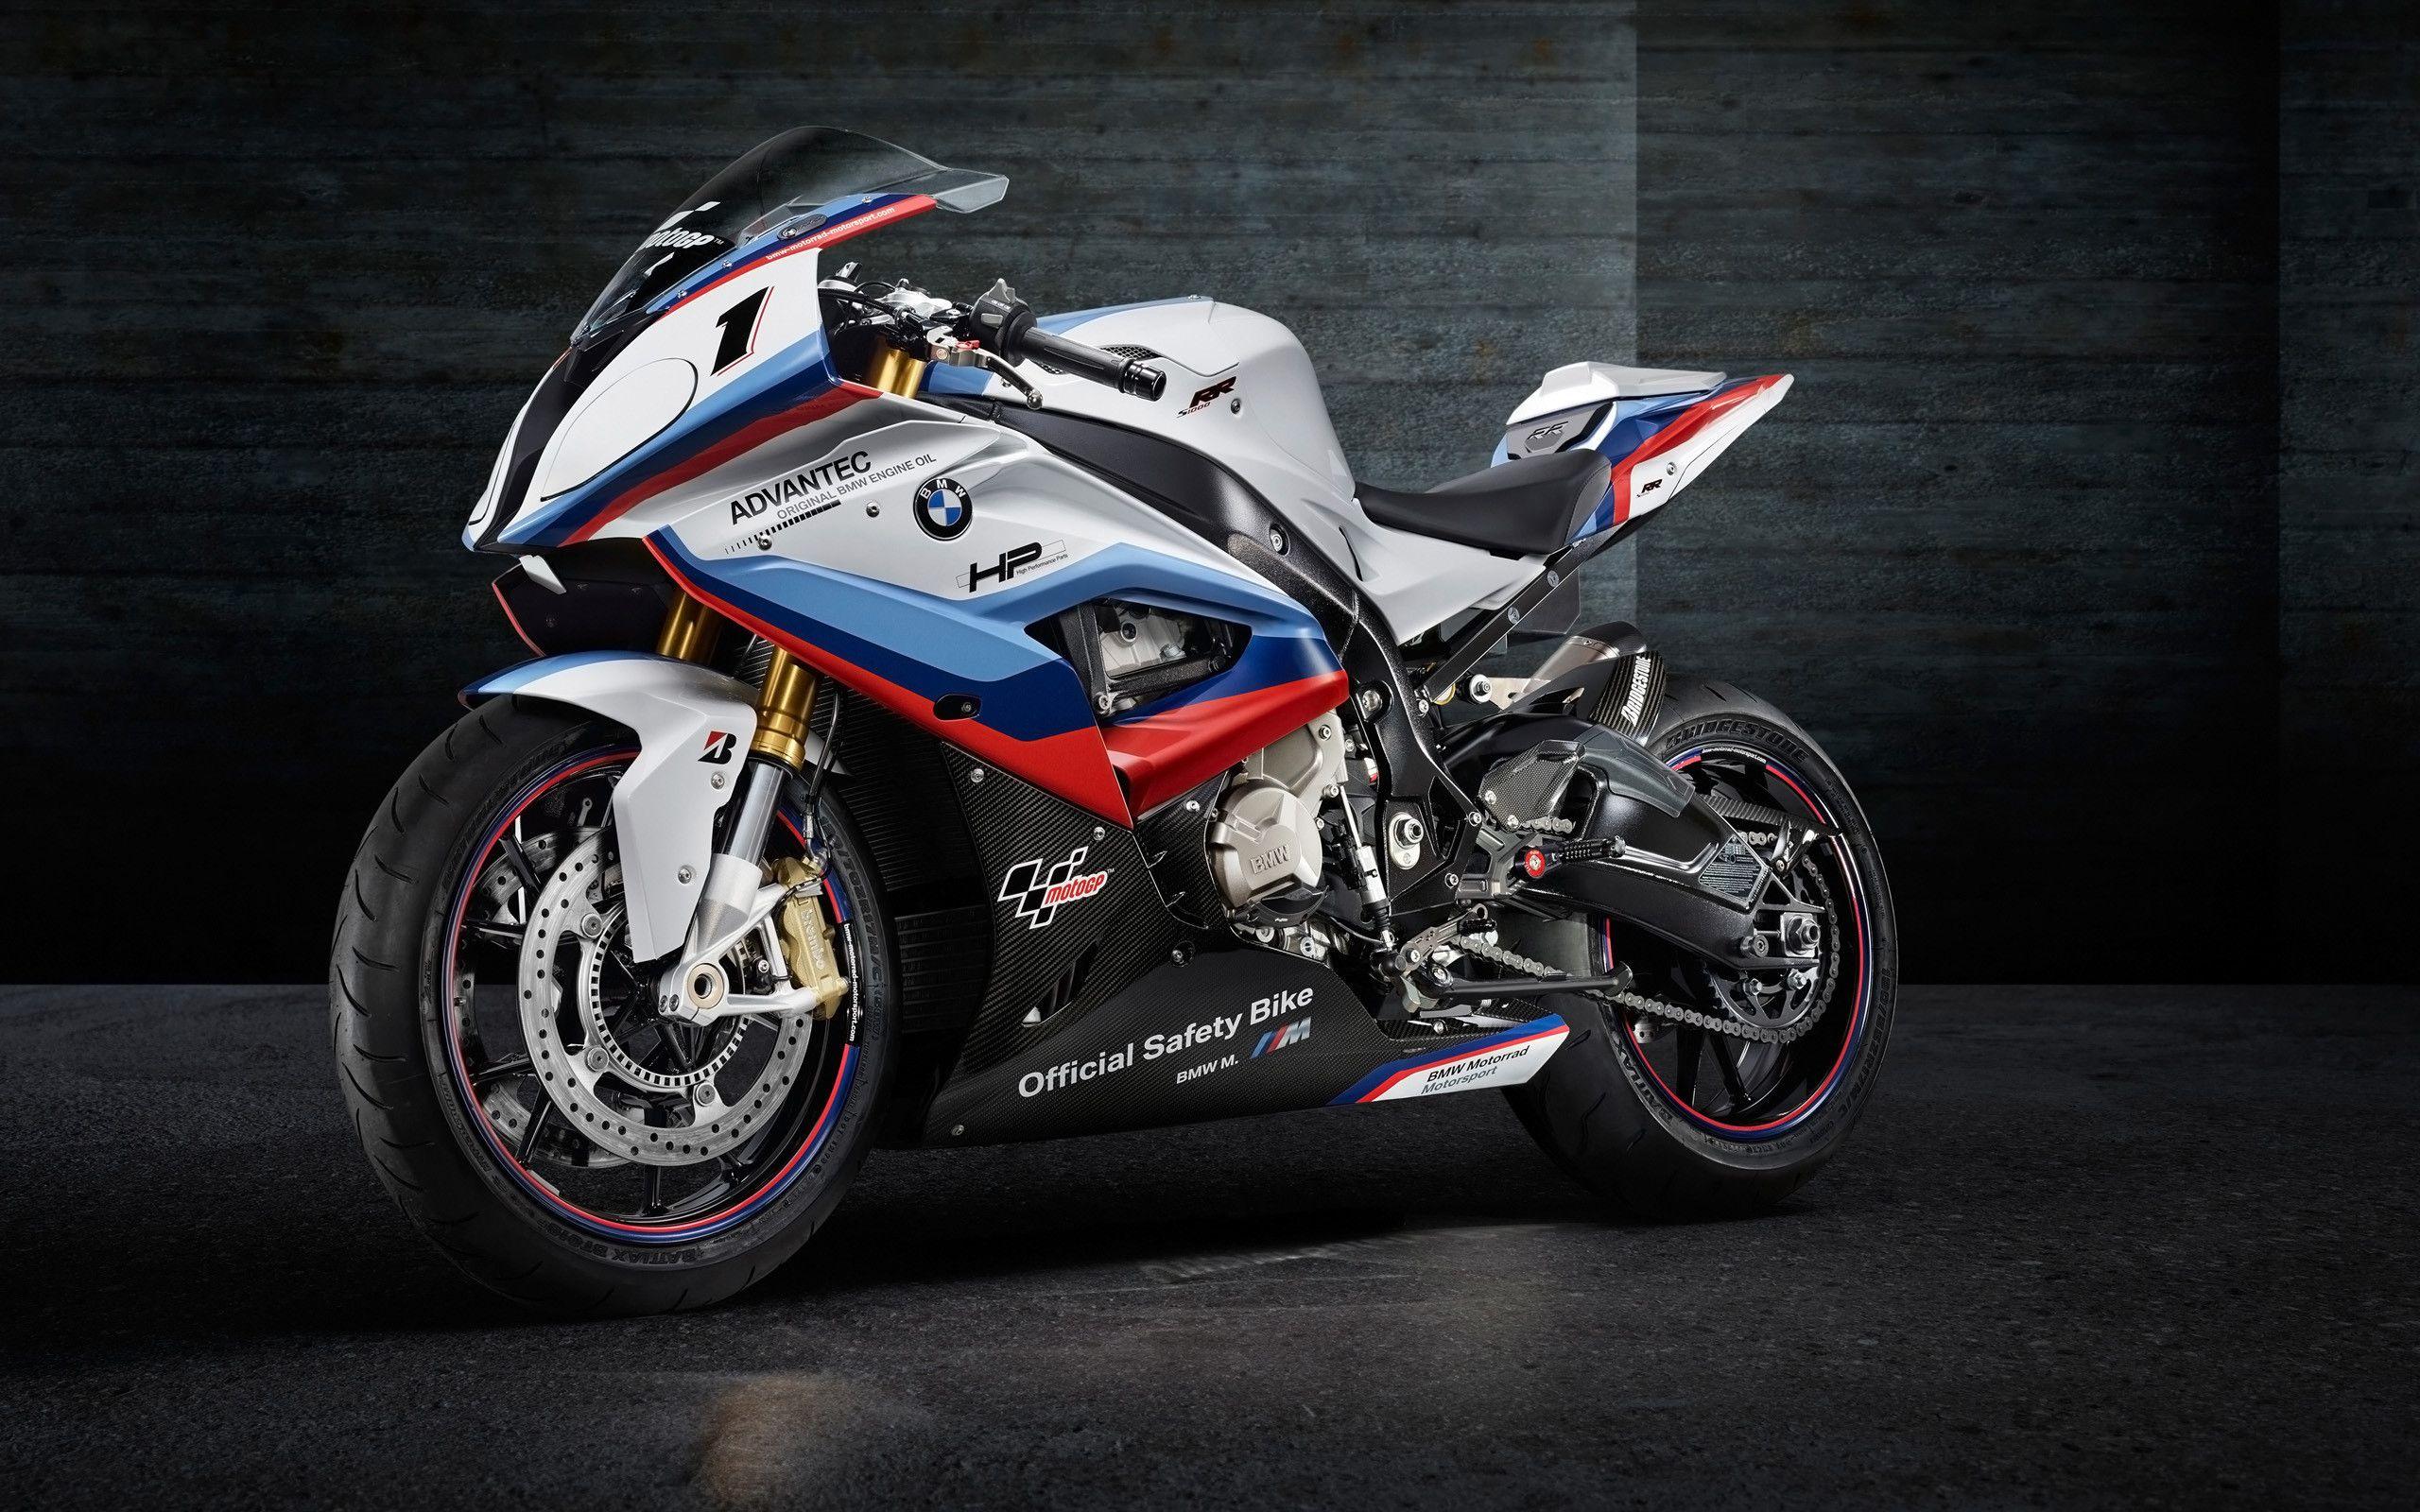 S1000rr Wallpapers Top Free S1000rr Backgrounds Wallpaperaccess